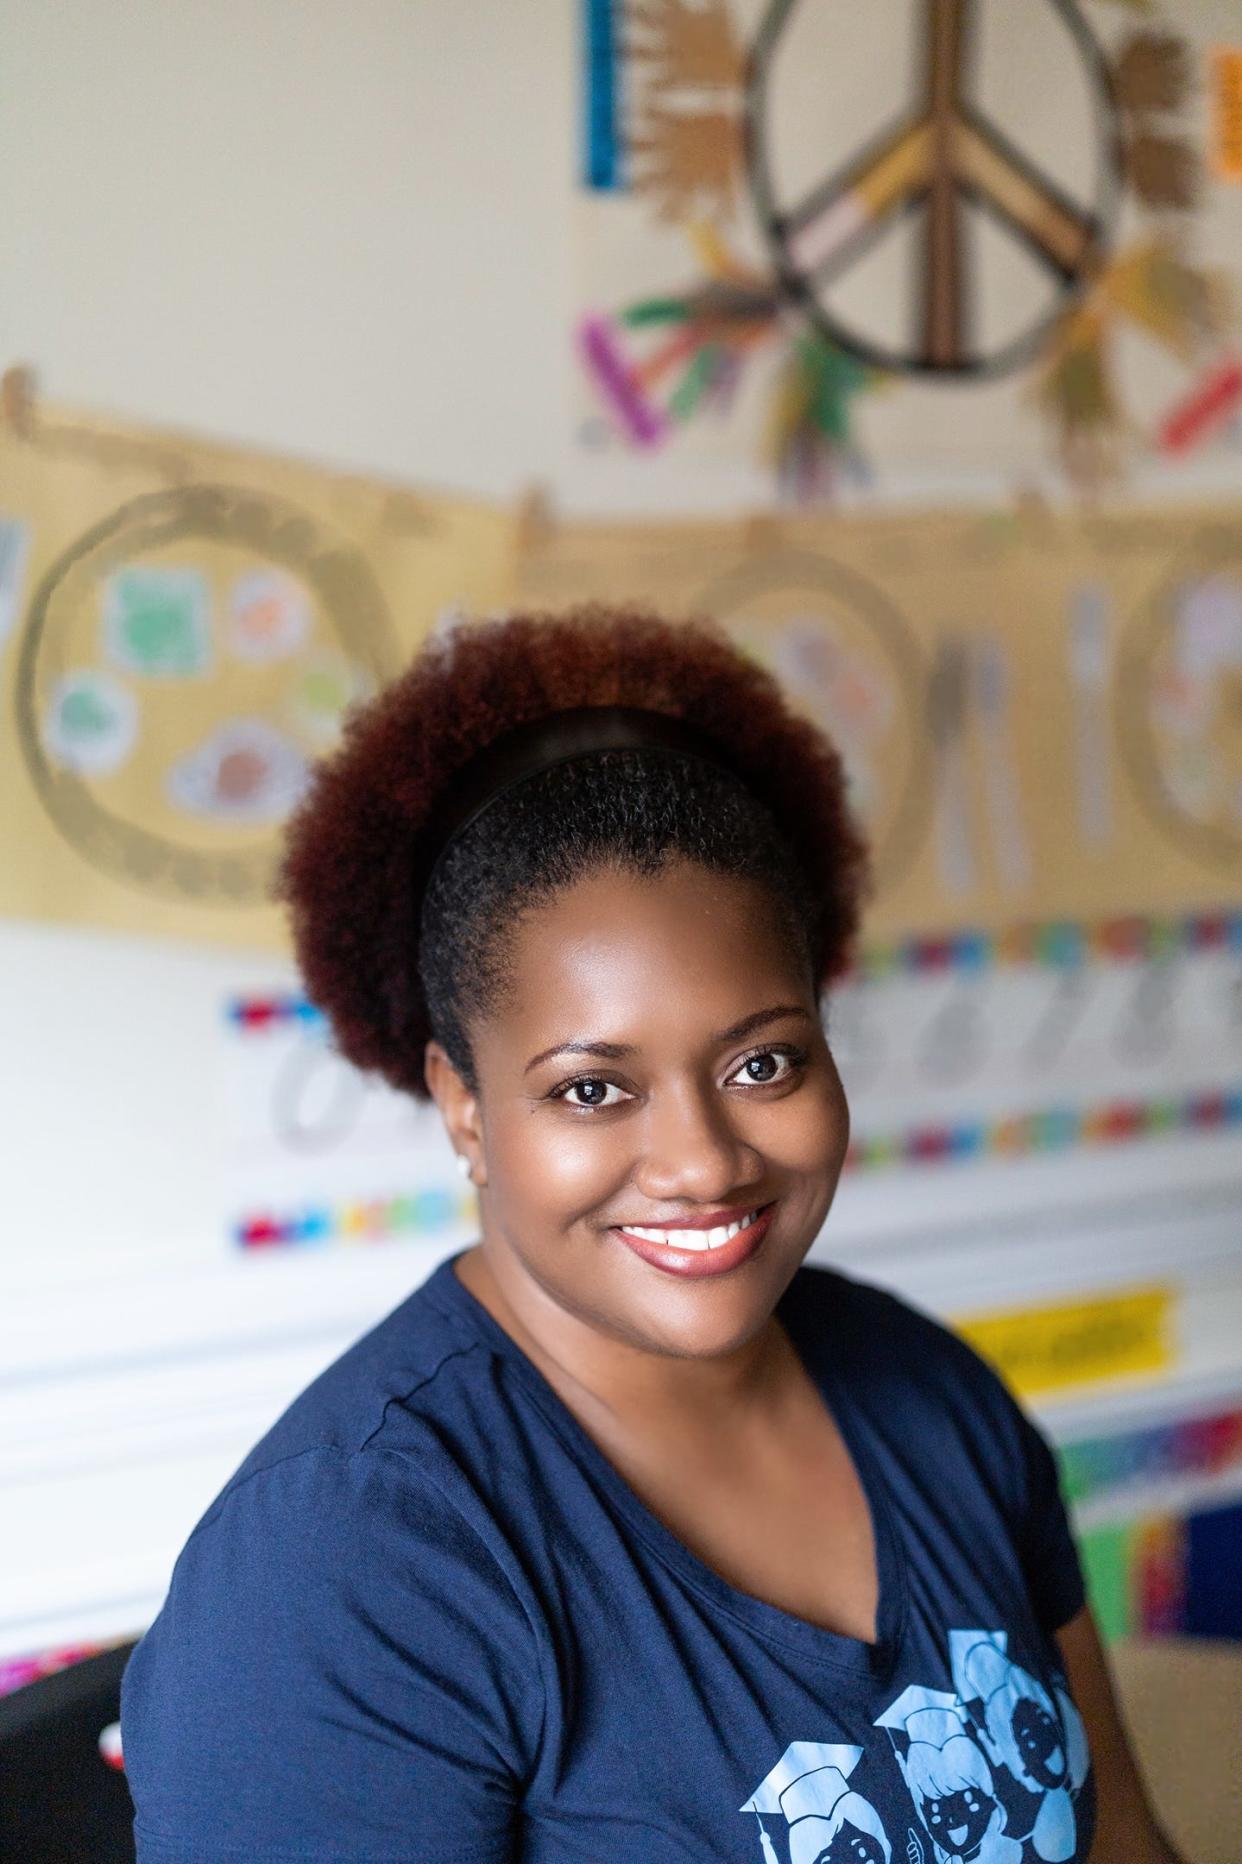 Owner/director of Smart Starters Academy, Chantelle Hester is one of two finalist in the Pre-School category for Georgia’s Early Childhood Educators of the Year awards. Winners will be announced by the end of Dec. 2023.